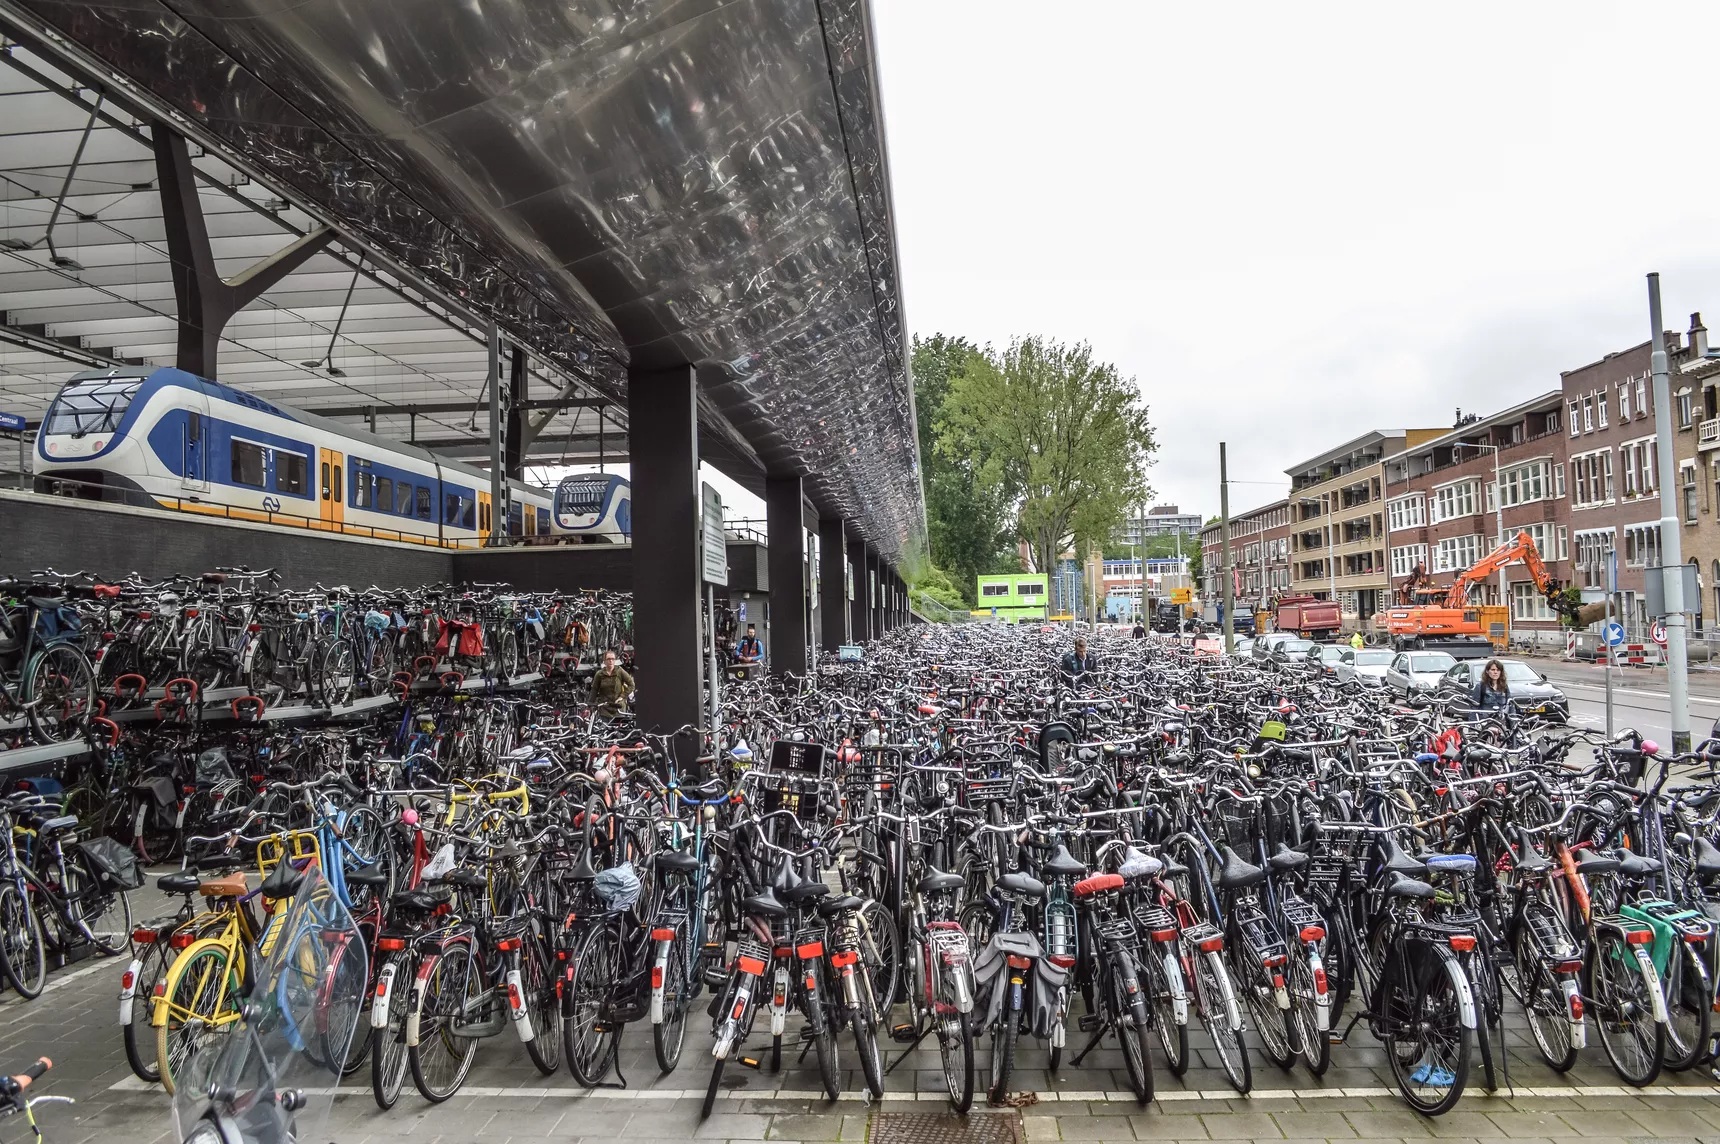 Bikes parked at a Dutch train station